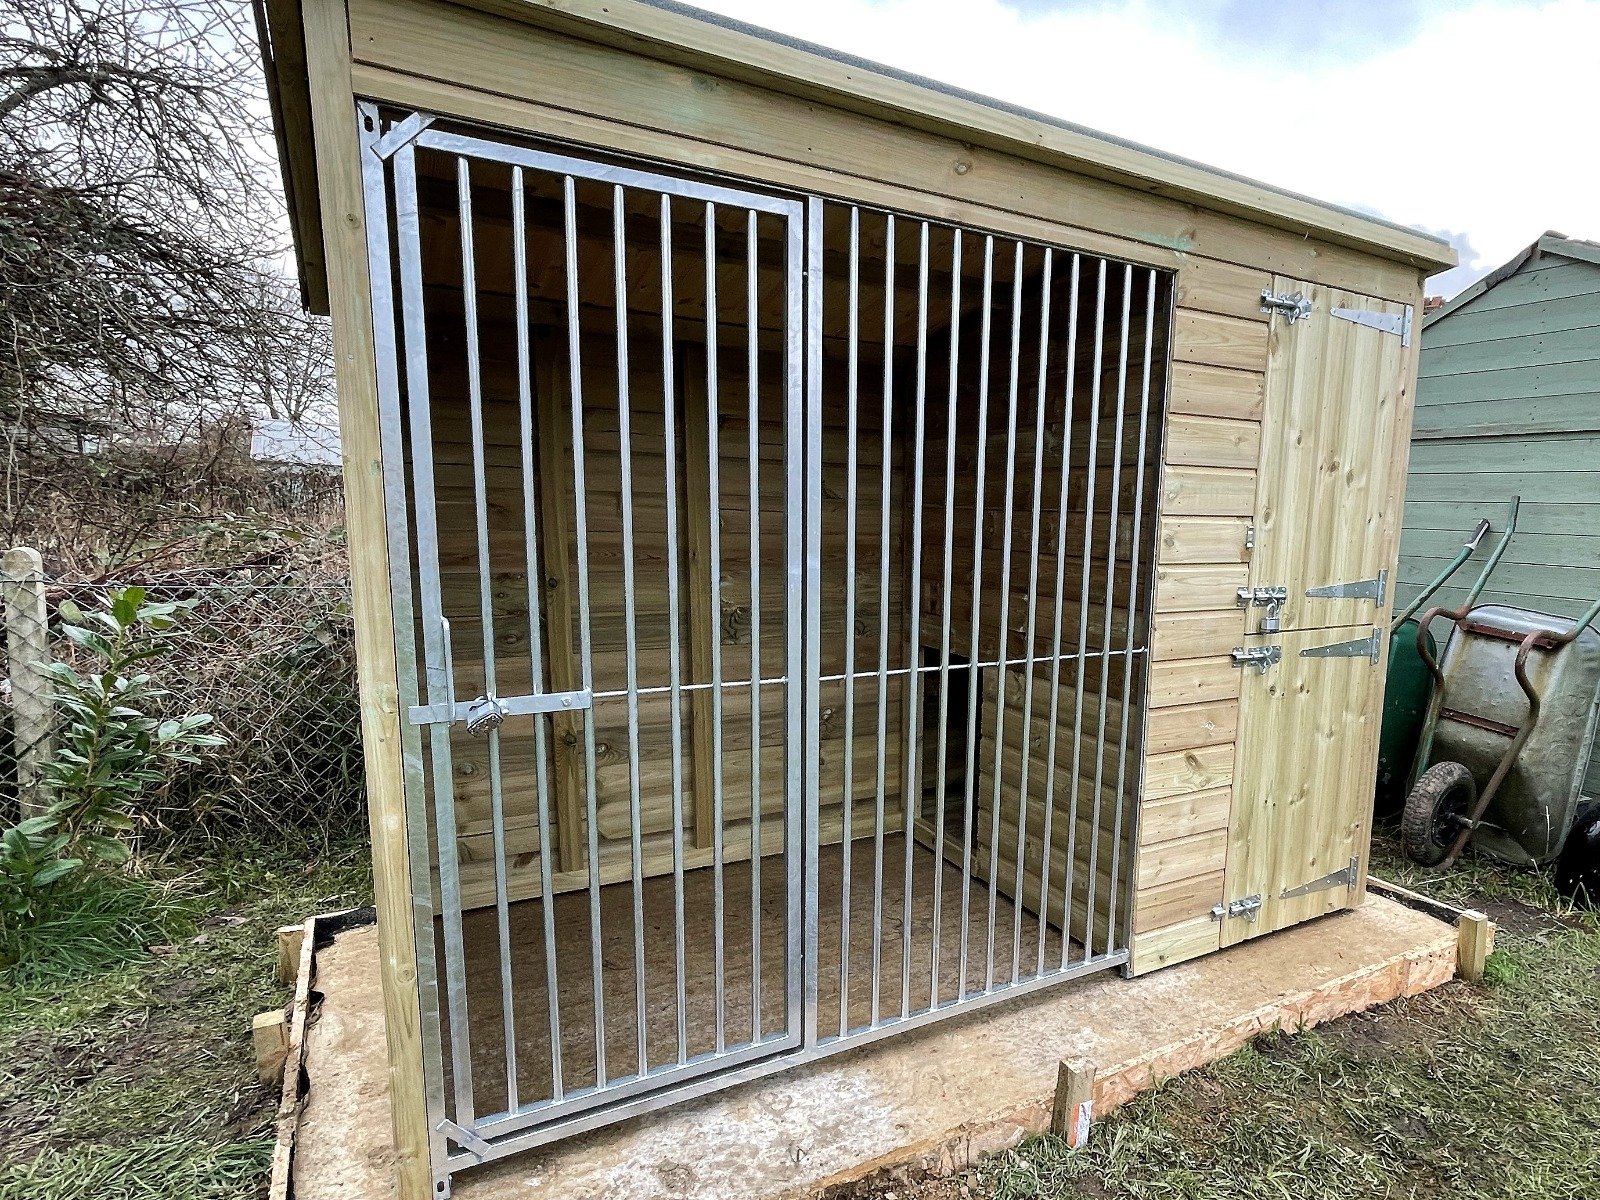 Chesterfield Dog Kennel 14ft (wide) x 6ft (depth) x 5'7ft (high)